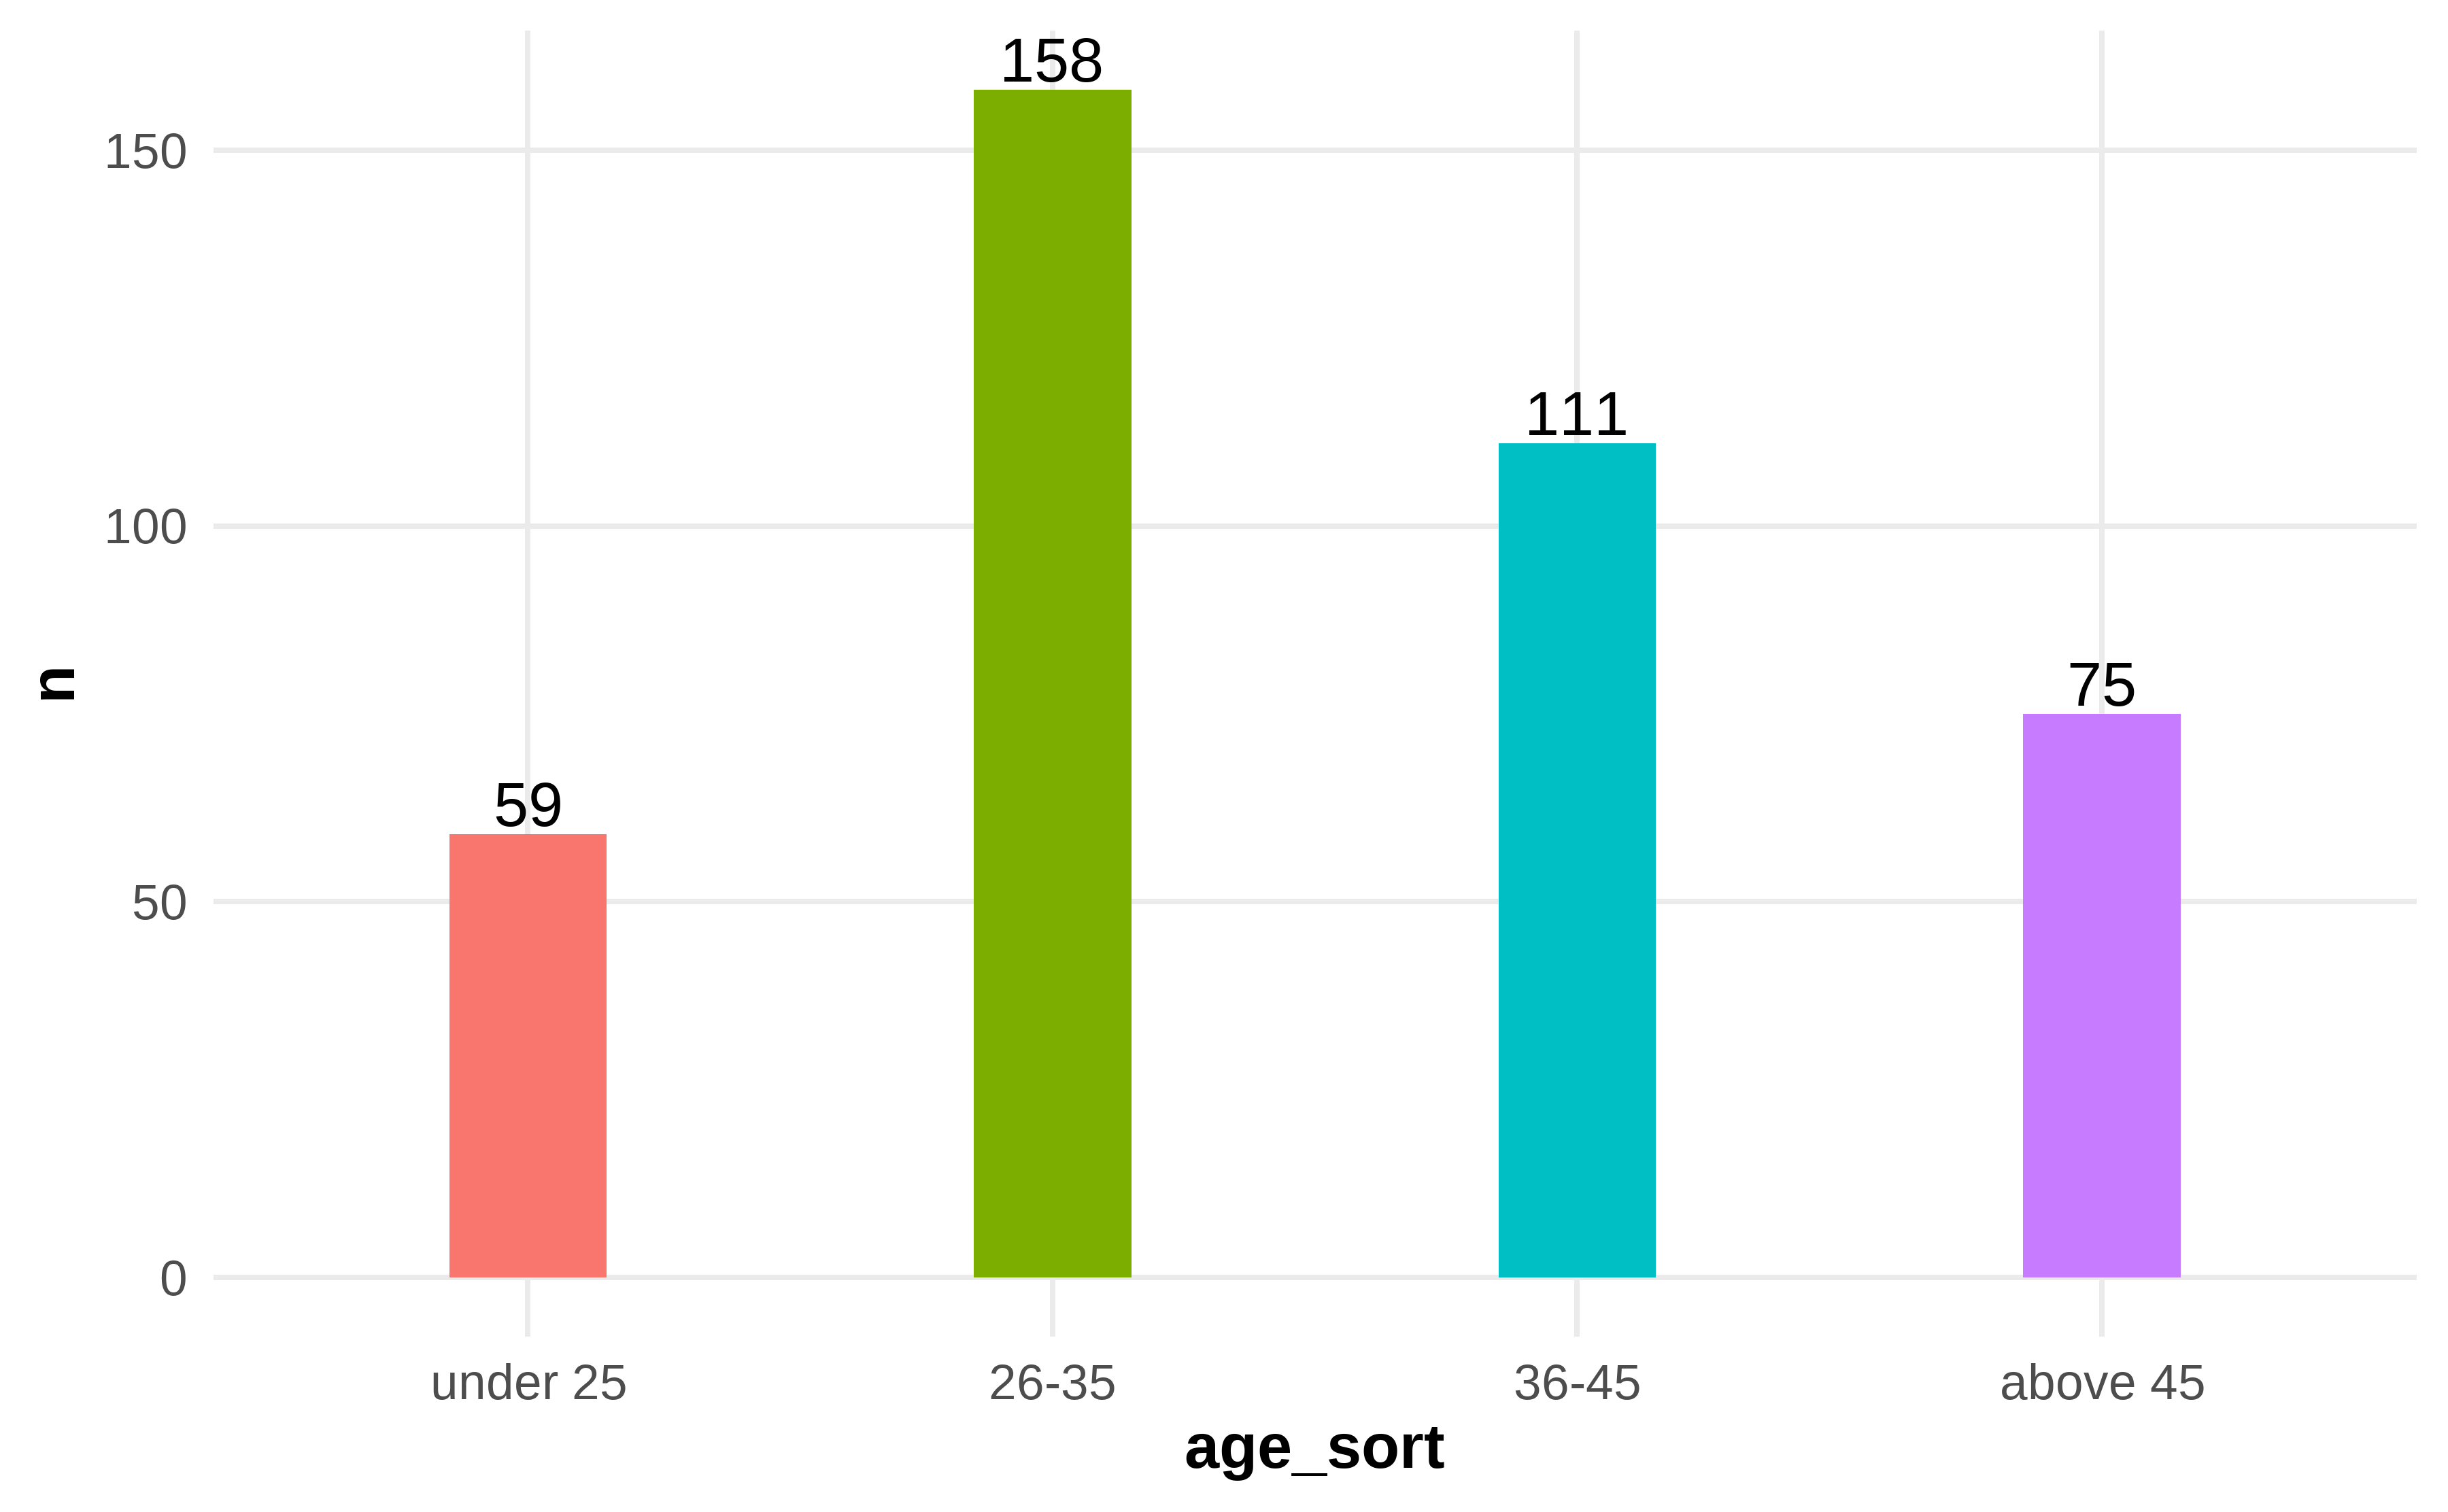 Frequency and Percentage of Age